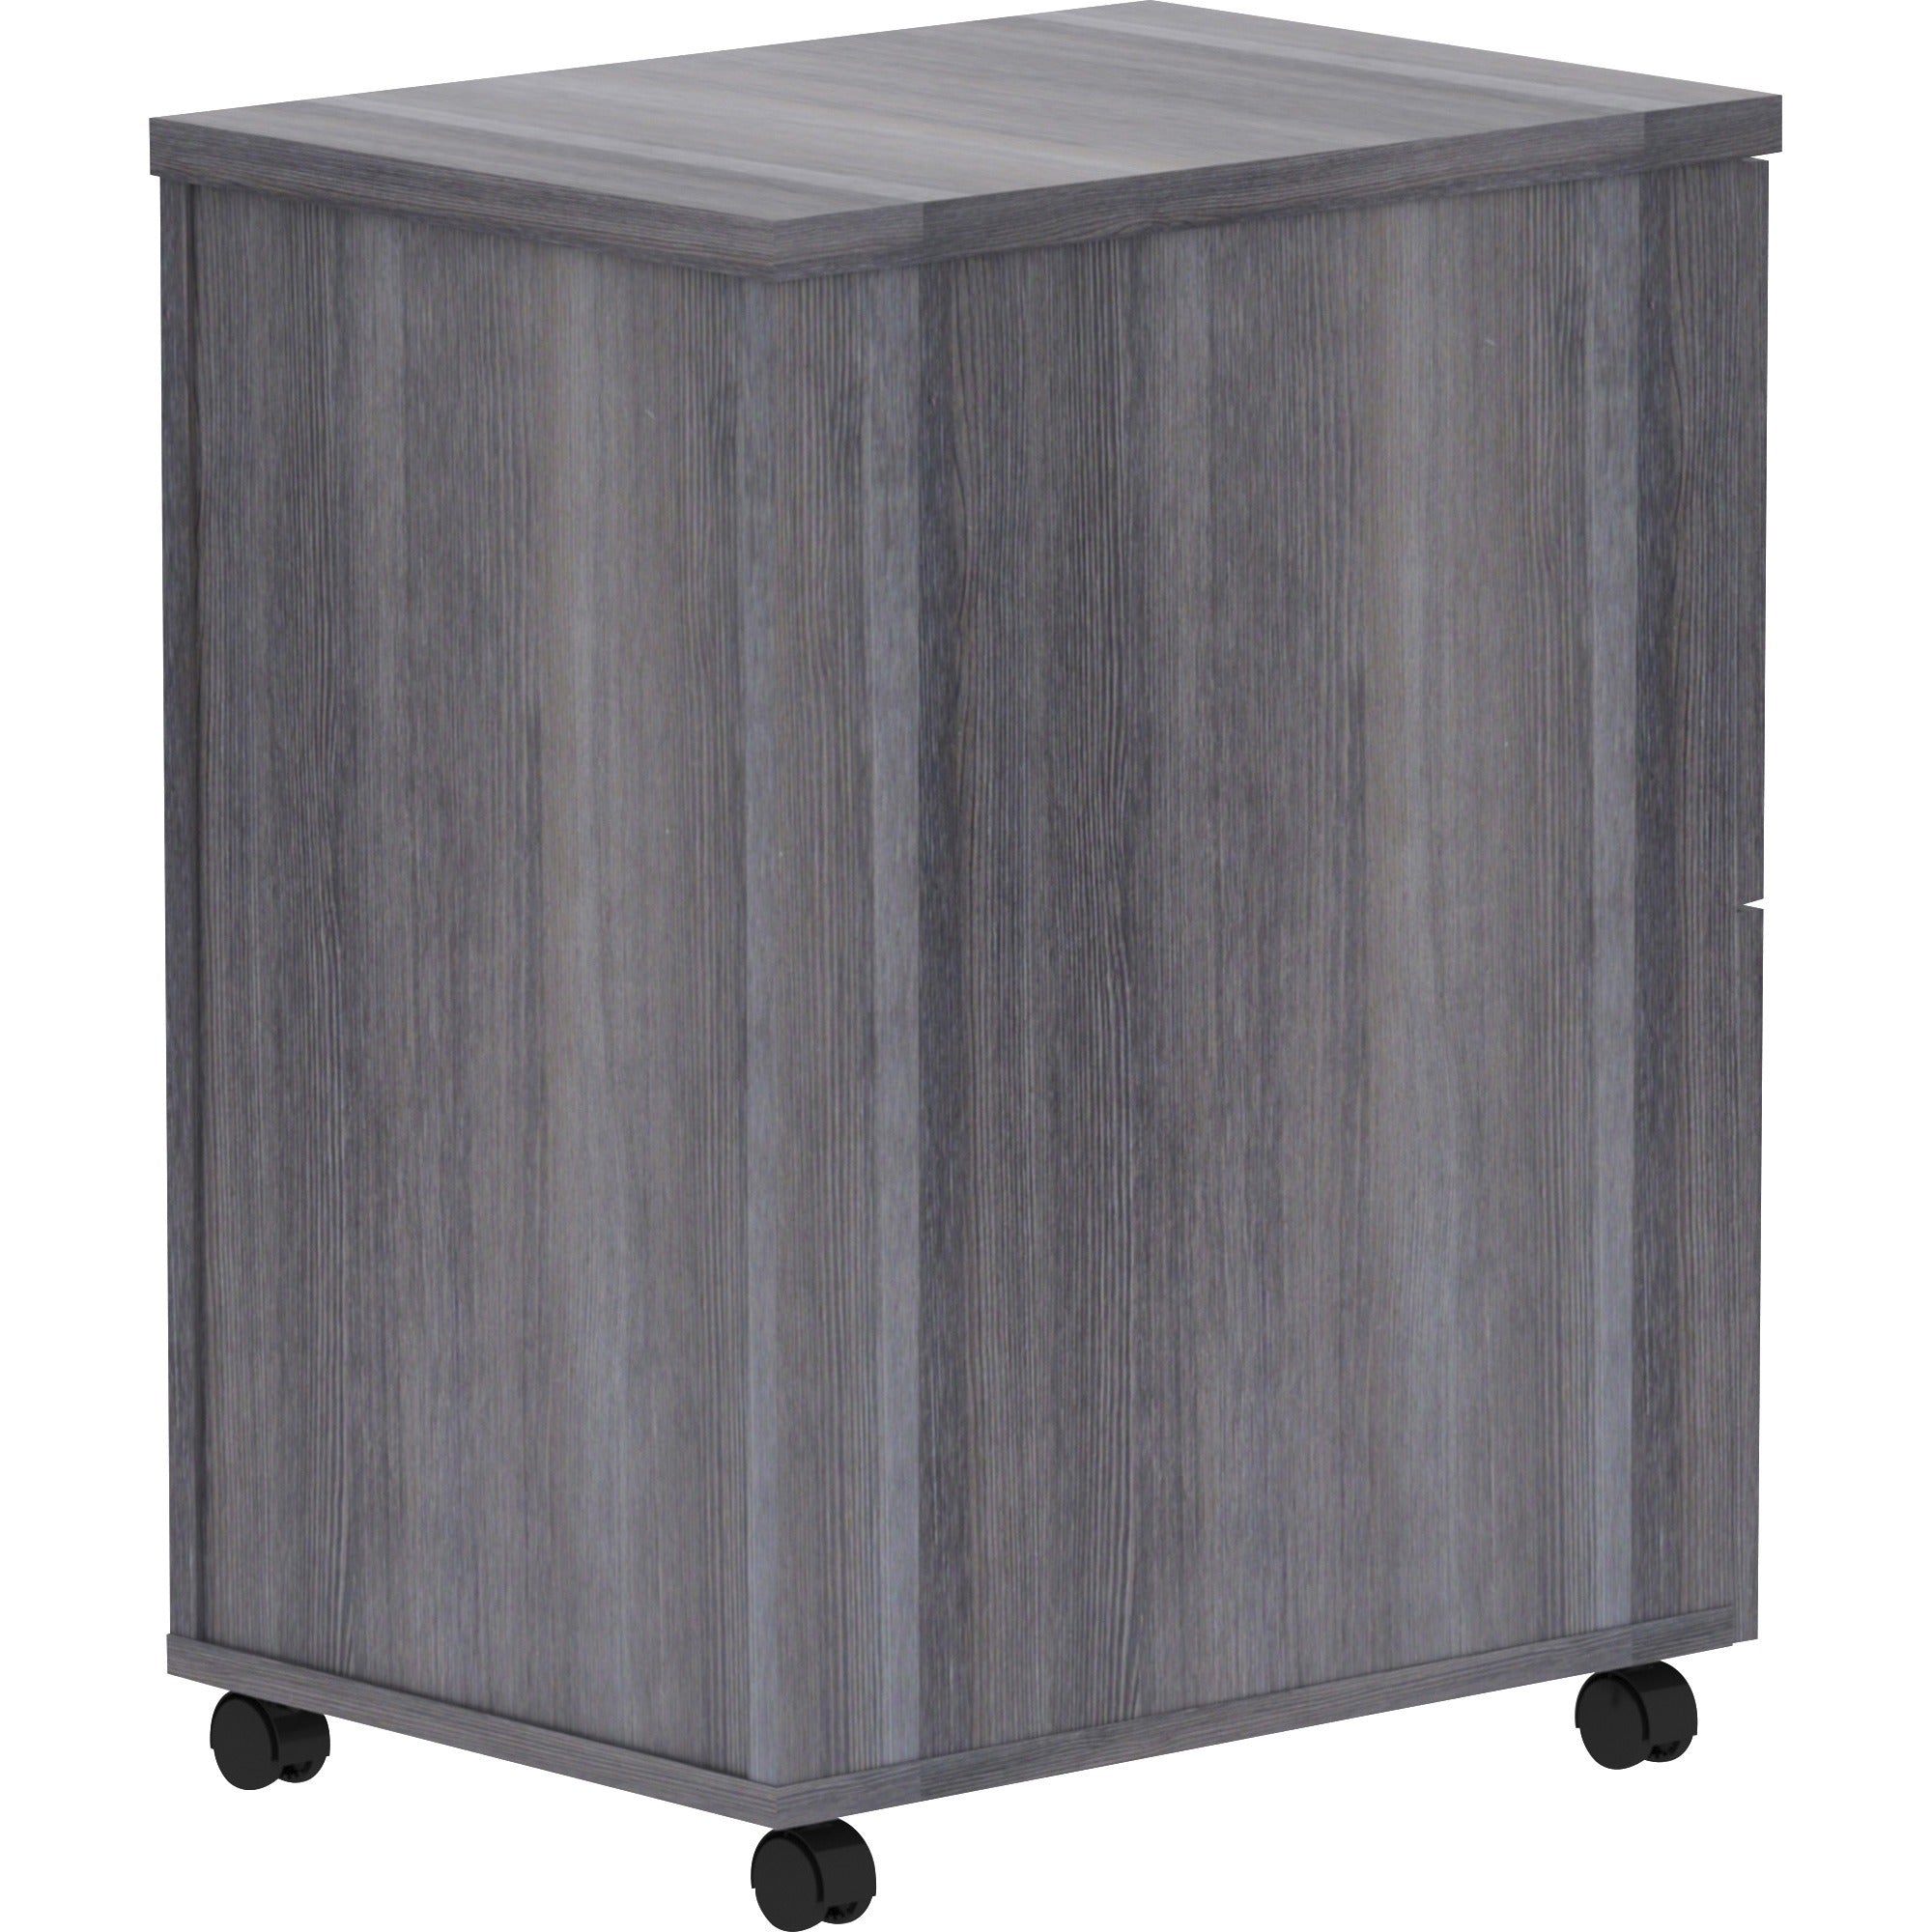 lorell-essentials-series-file-file-mobile-file-cabinet-16-x-22283-2-x-file-drawers-finish-weathered-charcoal-laminate_llr69561 - 4